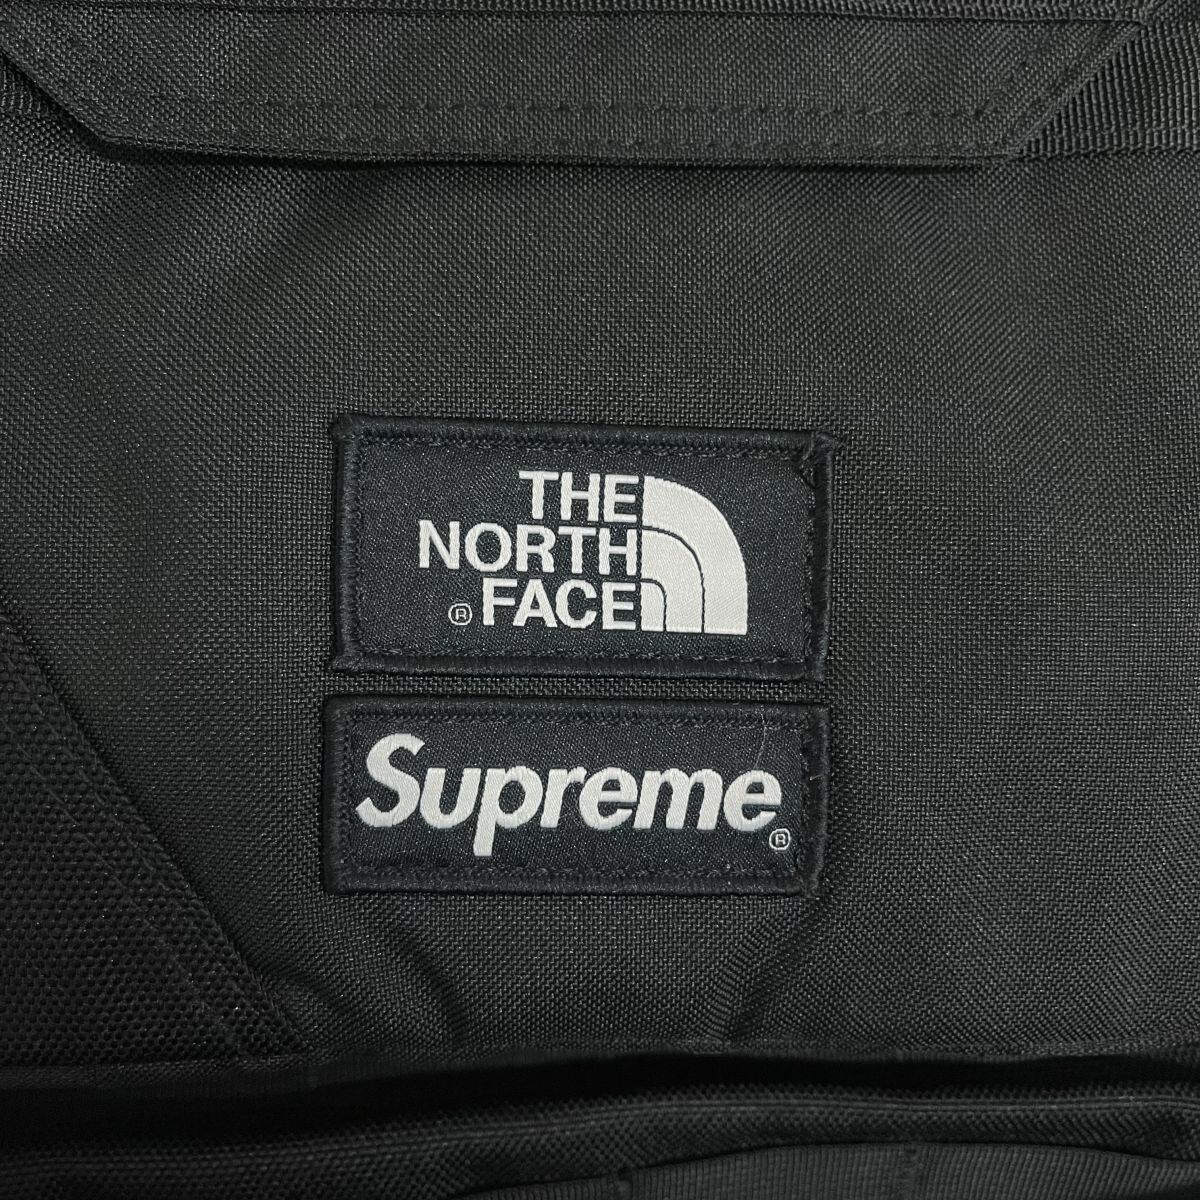 Supreme The North Face Backpack 16ss иэψ